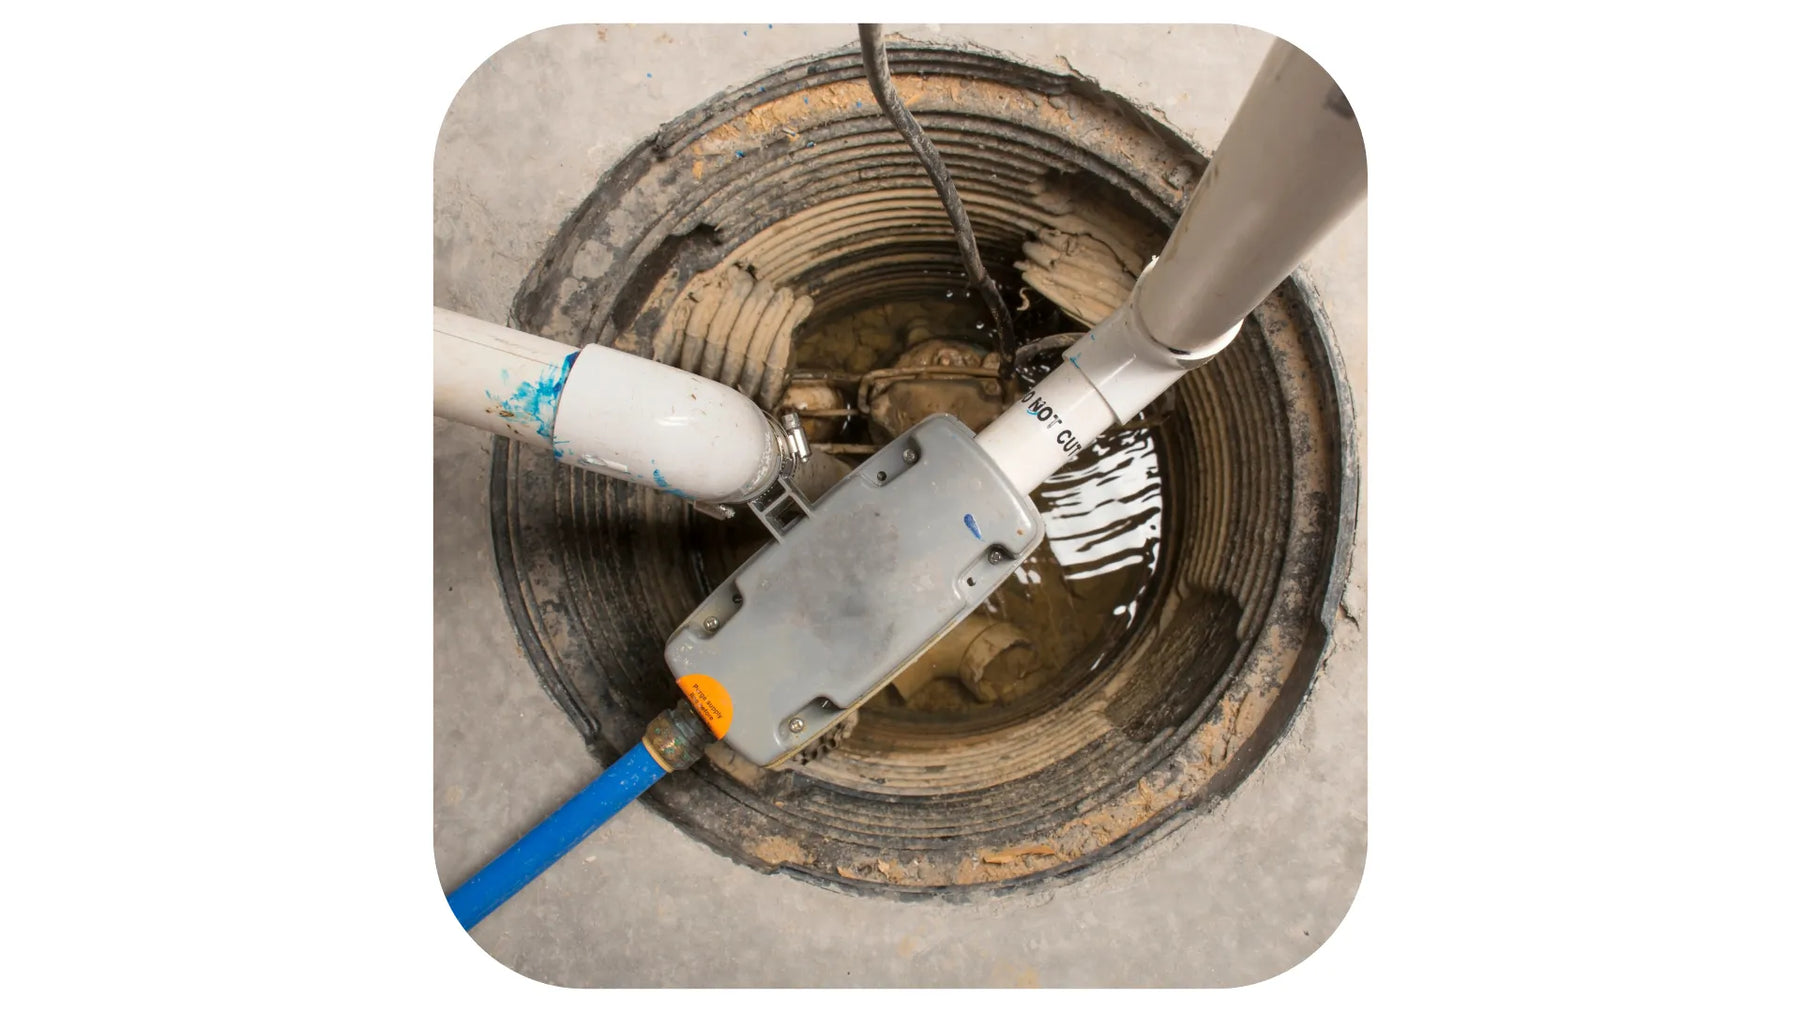 How to Test Your Sump Pump in 4 Easy Steps